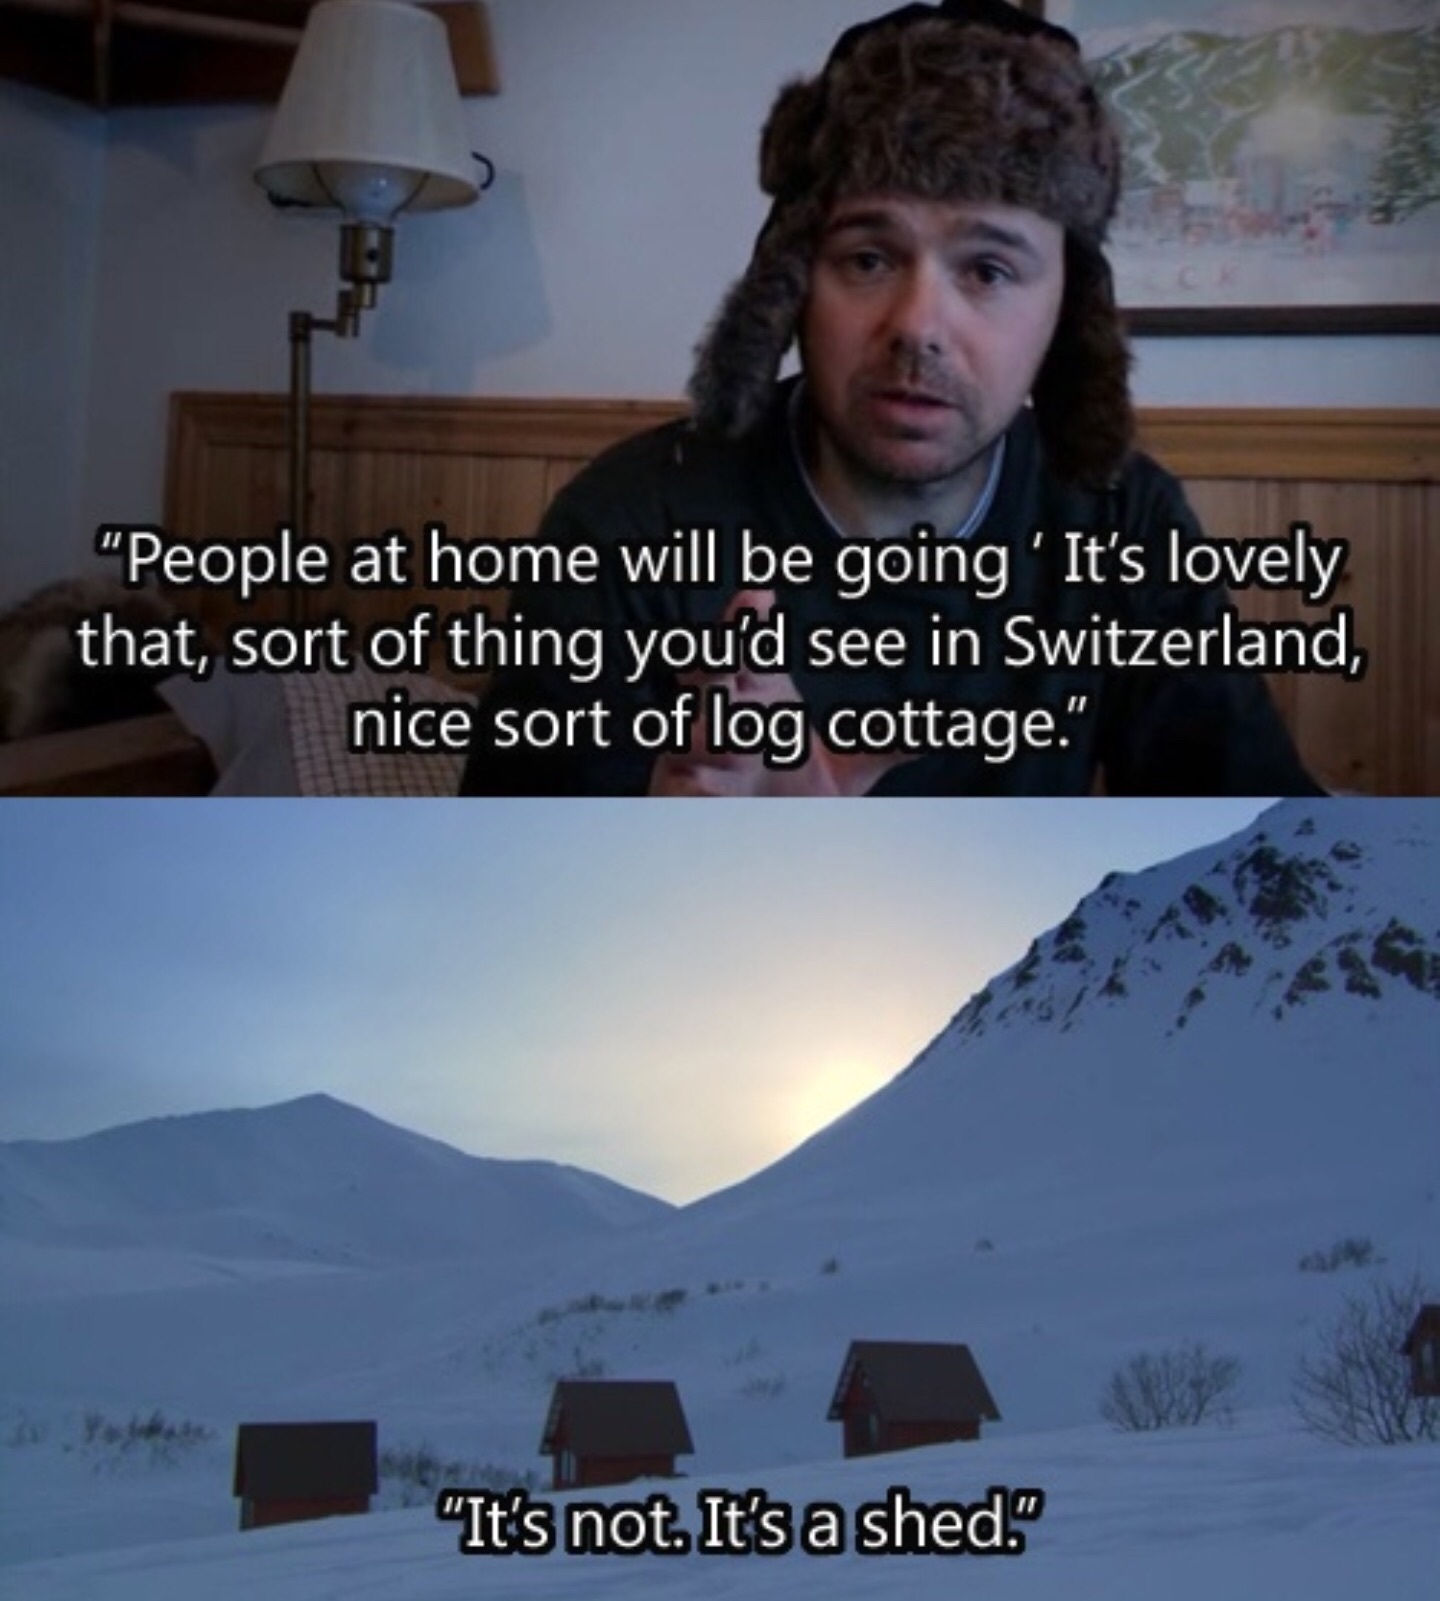 showerthoughts   - karl pilkington best bits - "People at home will be going 'It's lovely that, sort of thing you'd see in Switzerland, nice sort of log cottage." D tes not. It's a shed "It's not. It's a shed."